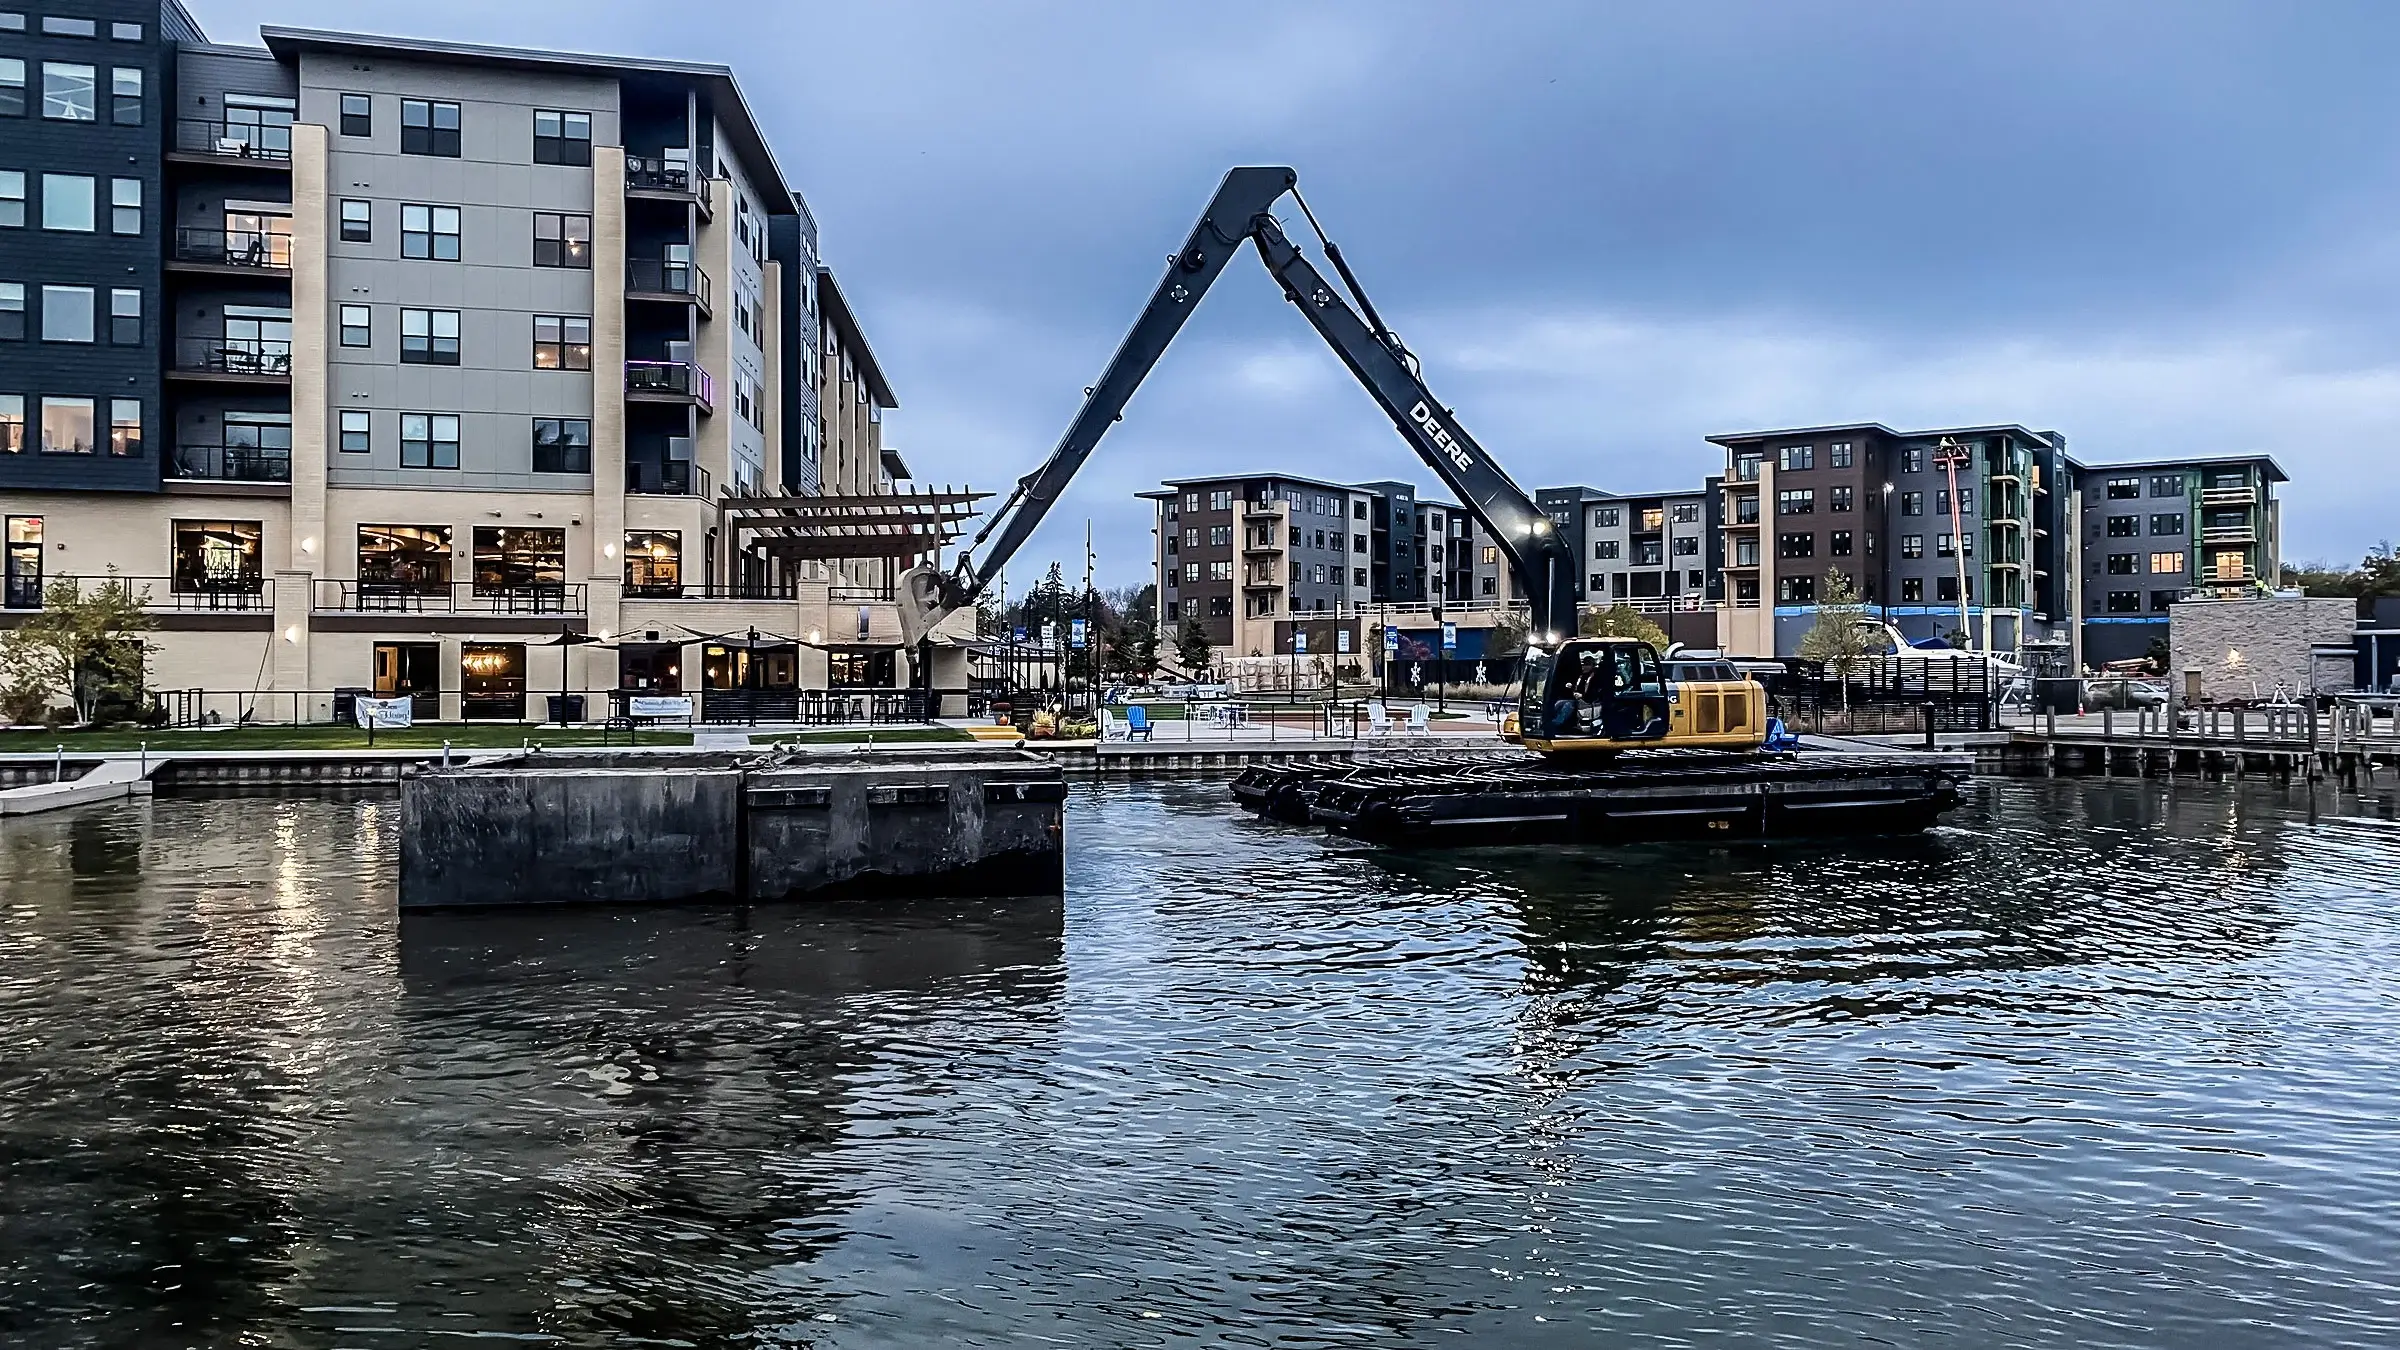 An amphibious excavator operates in a channel near condo homes